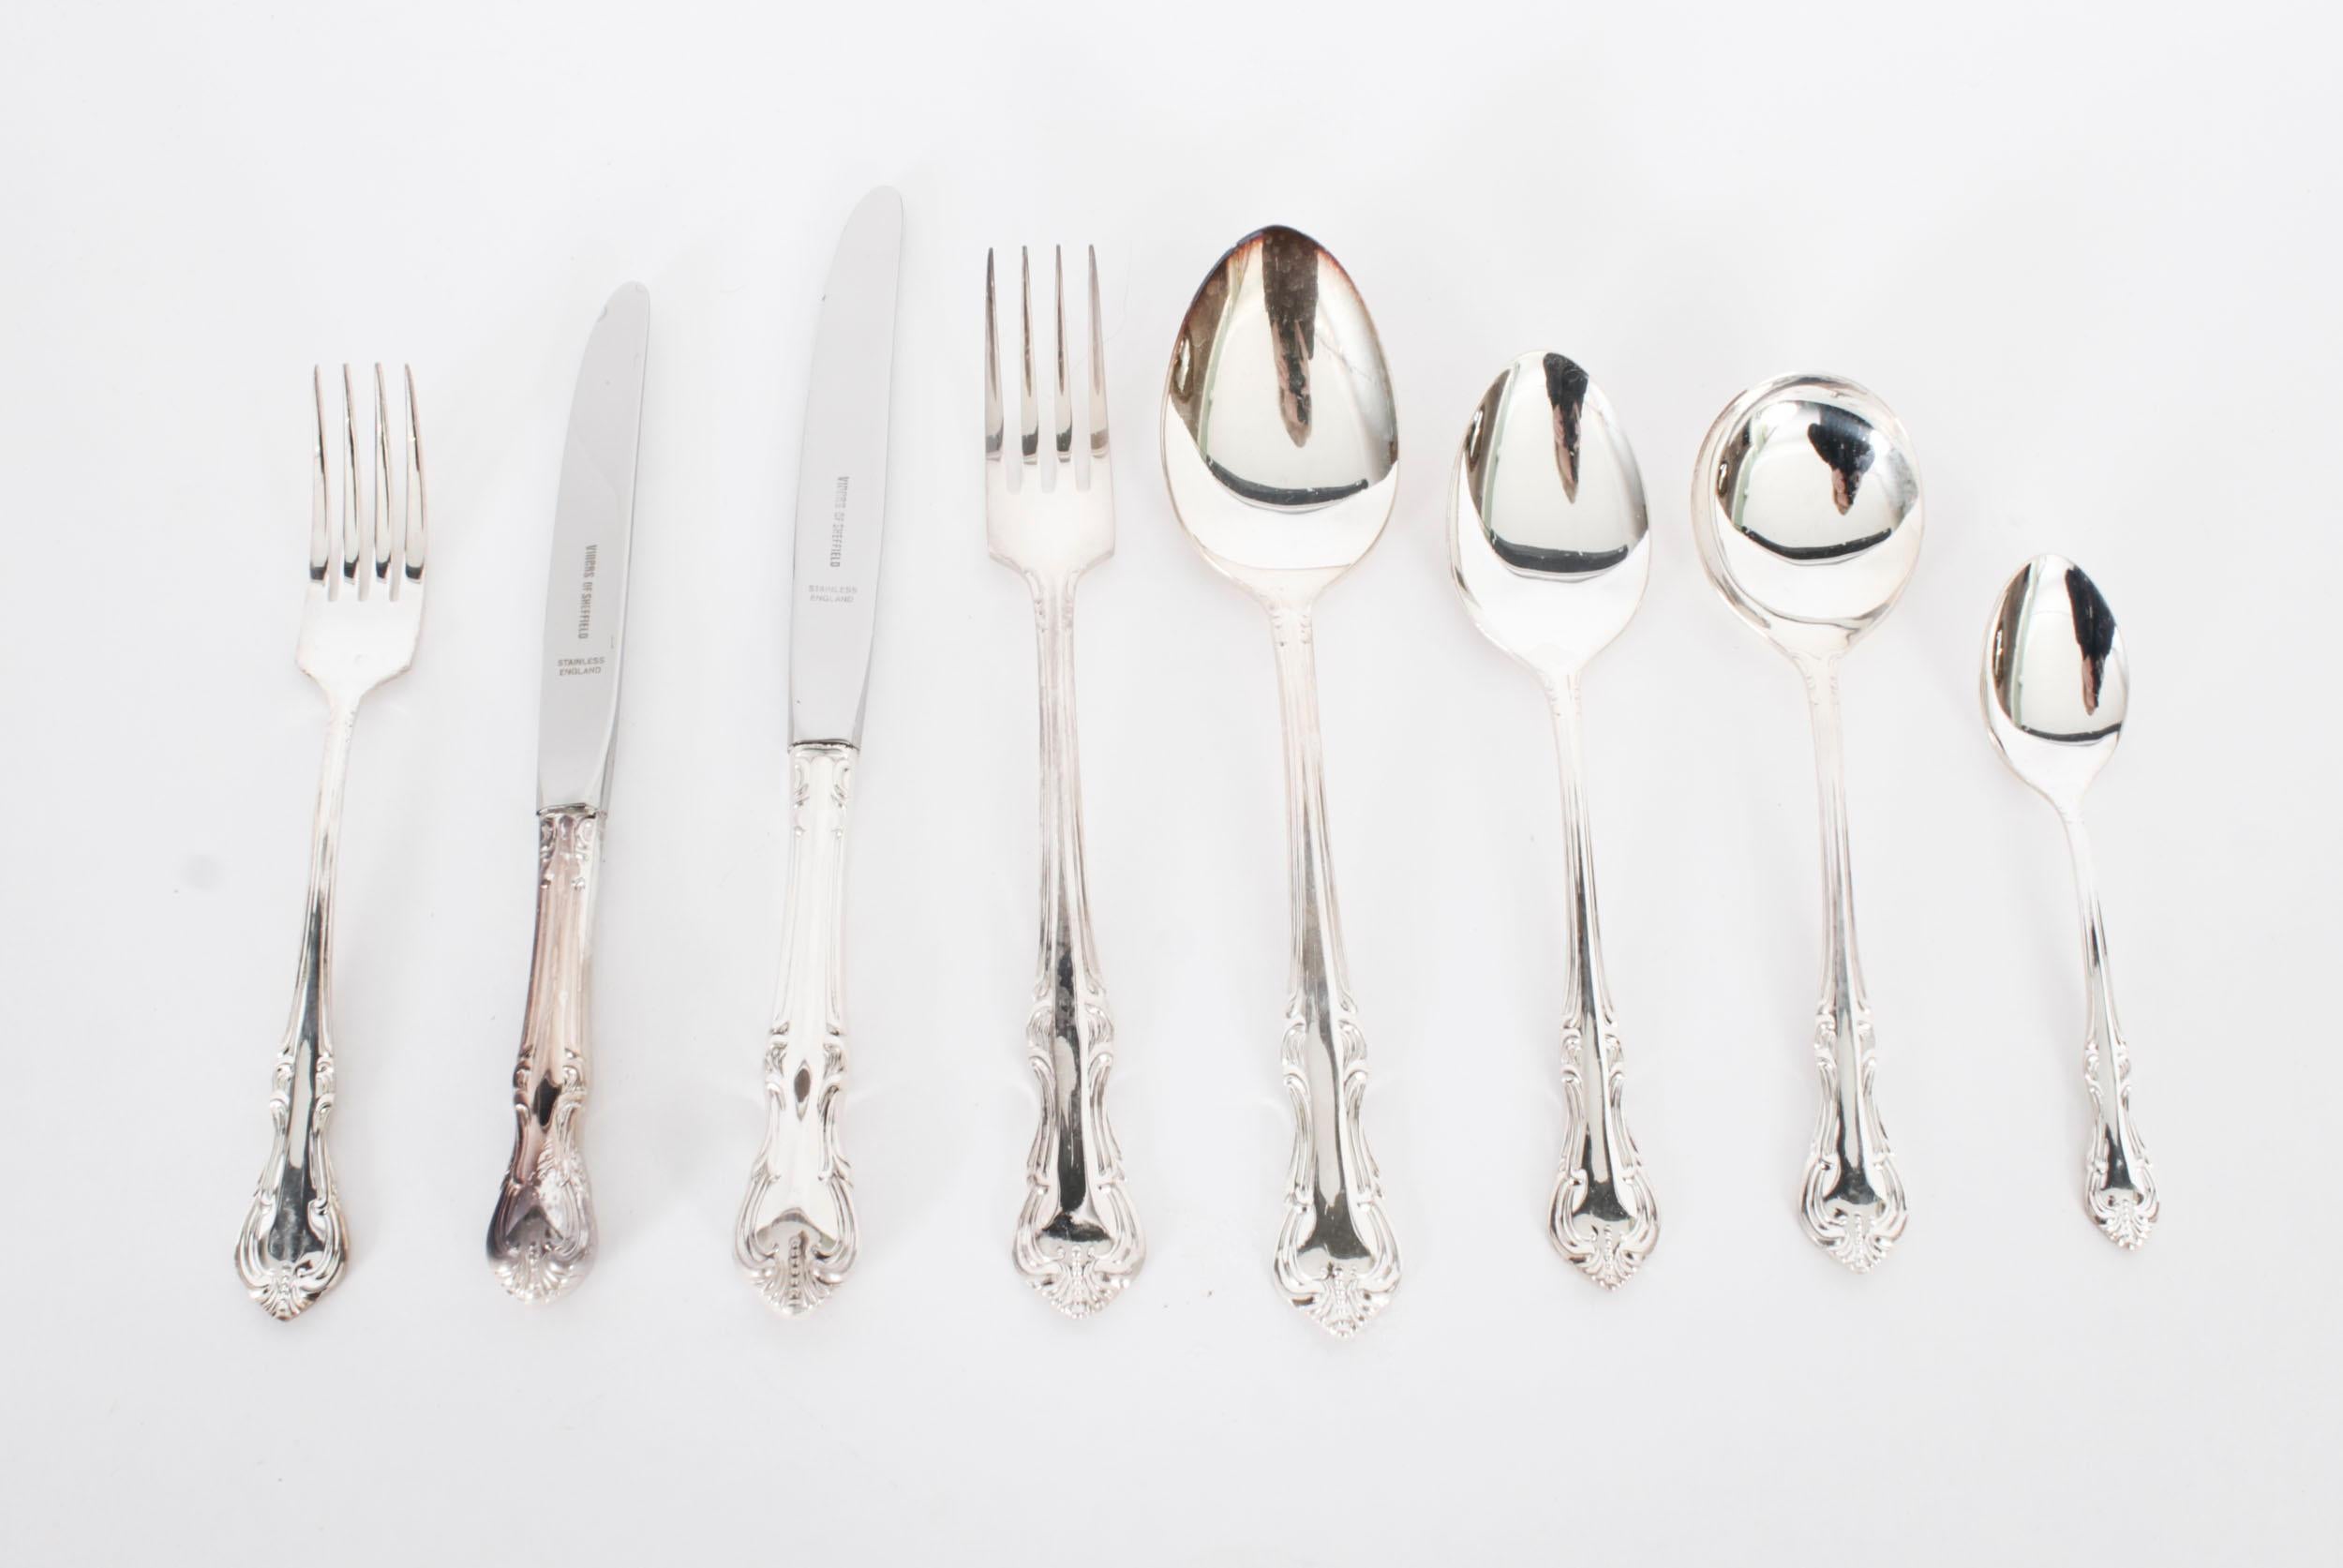 This is a stunning vintage 6 place setting A1 Sheffield England, silver plated cutlery set by the renowned Sheffield silversmith Viners dating from the second half of the 20th century, and never having been used.
 
The beautiful set consists of 44